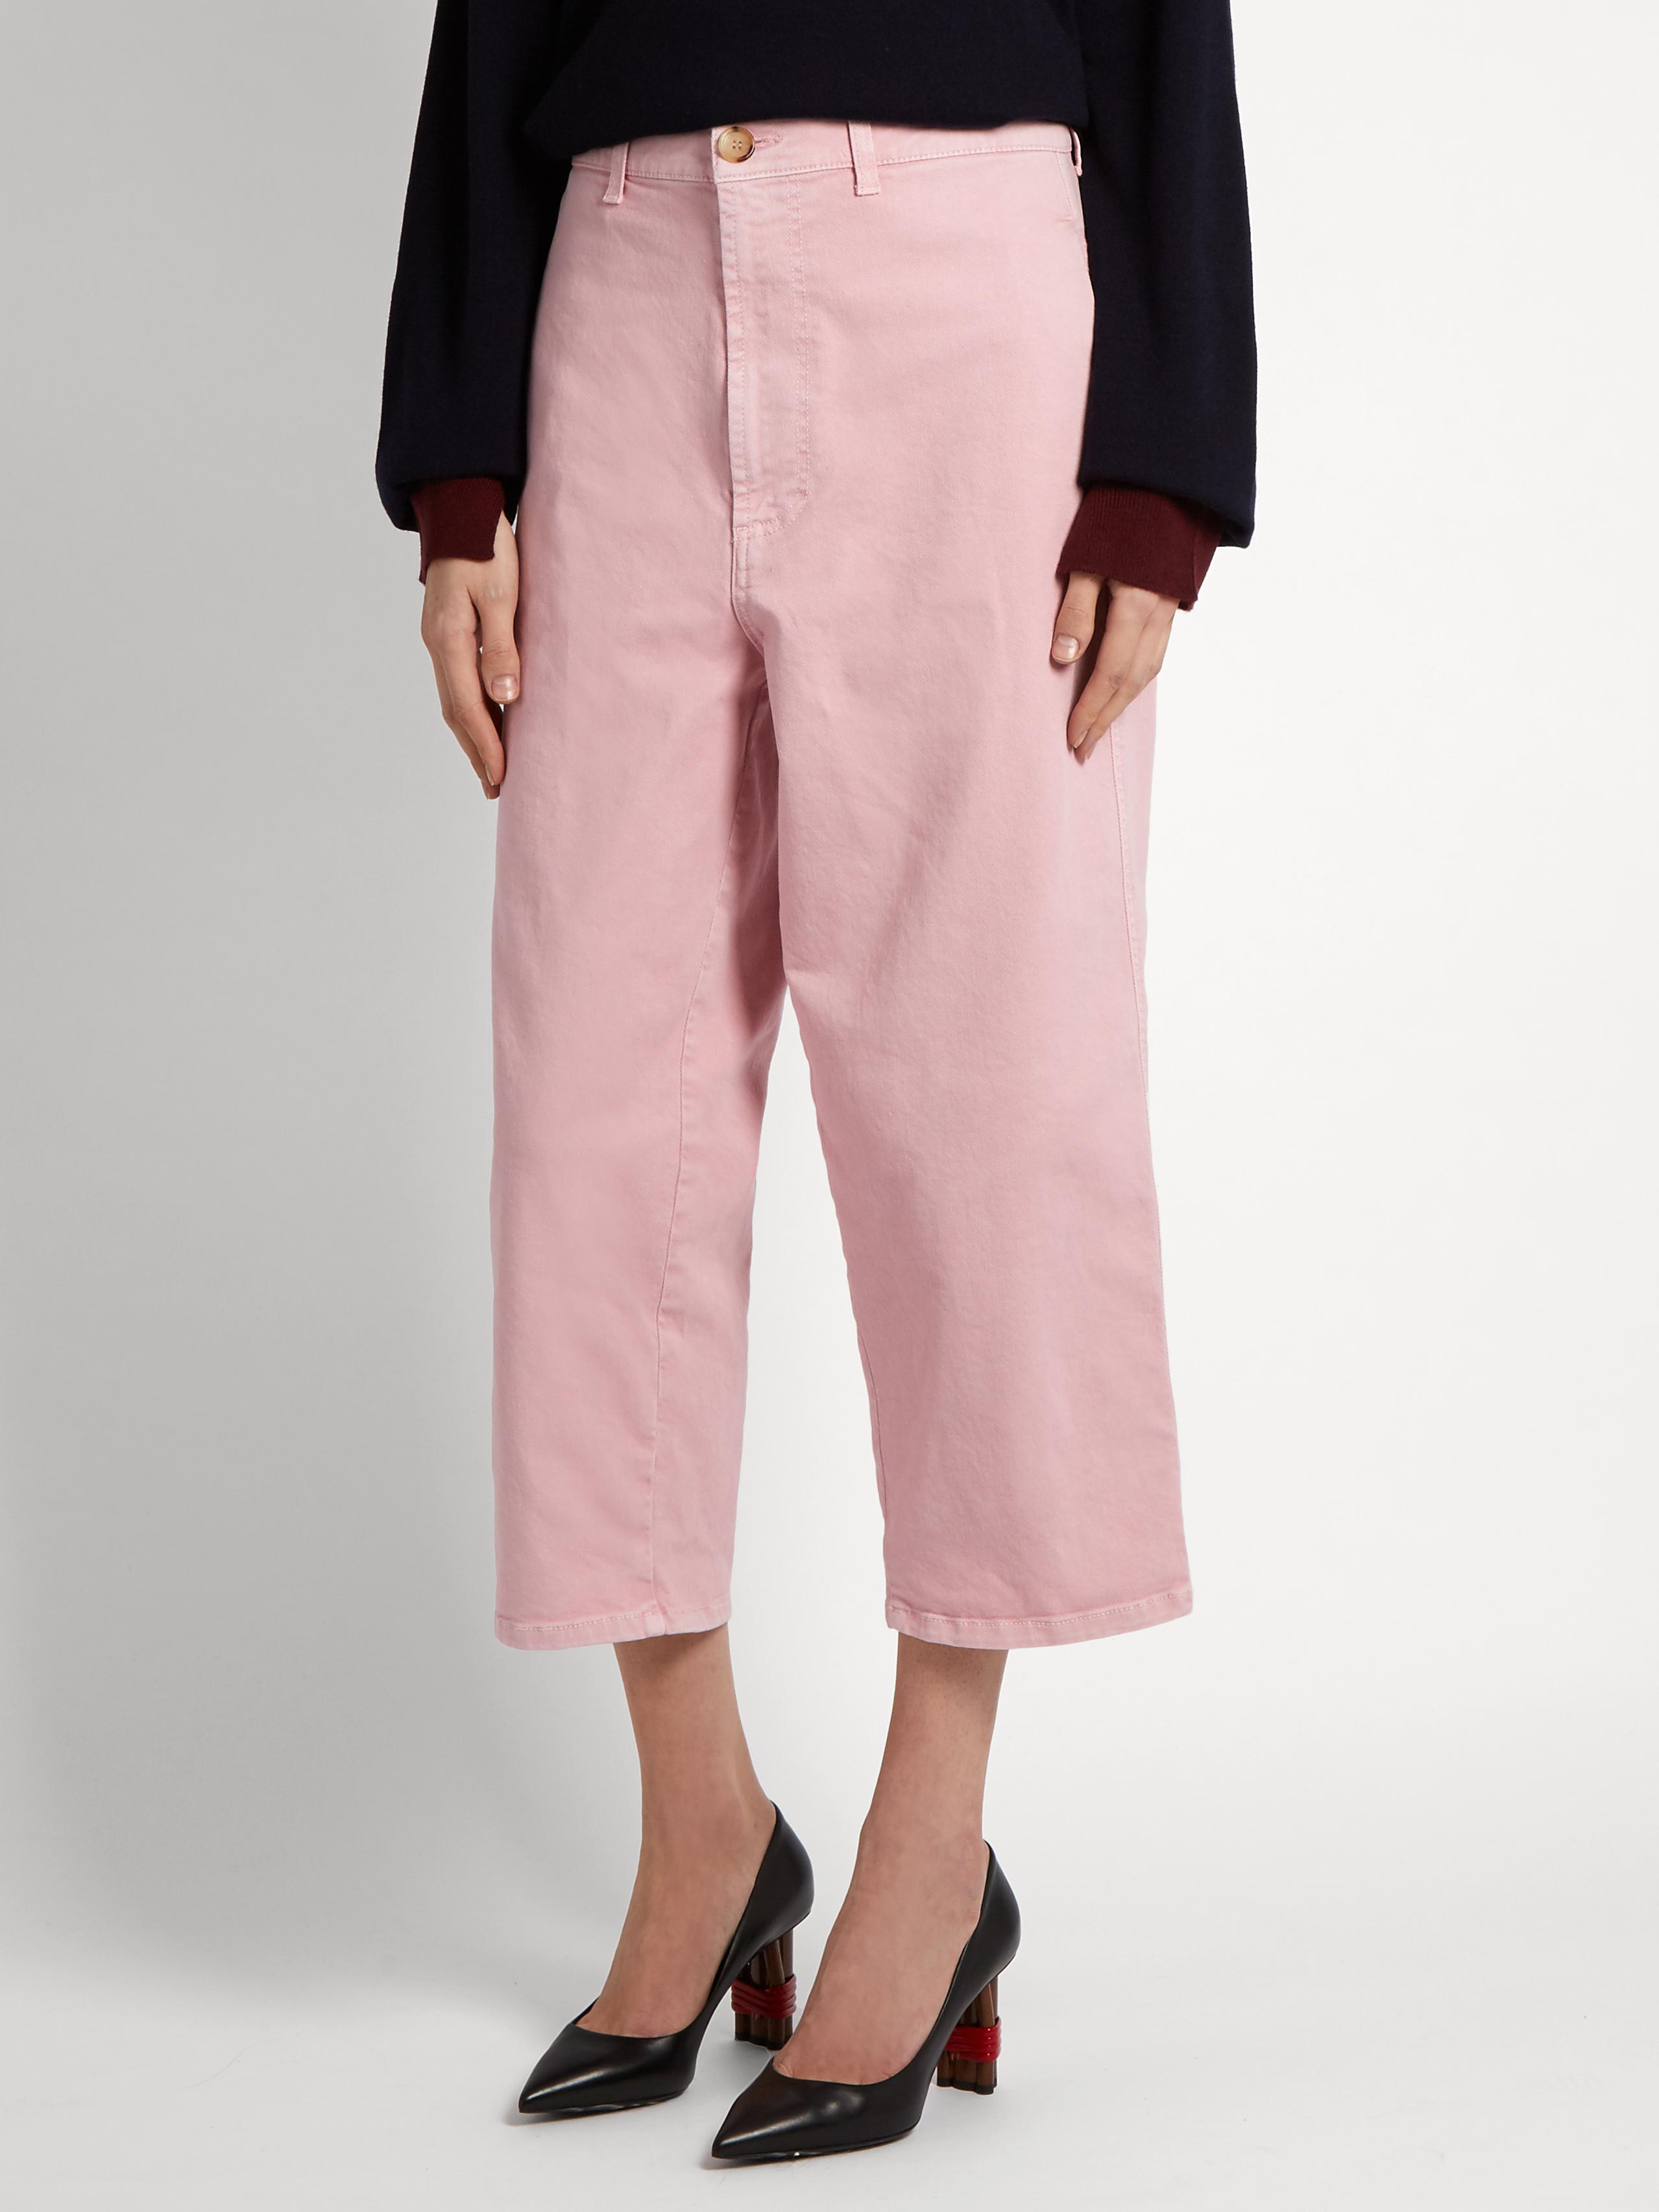 Marni Low-slung Wide-leg Cropped Jeans in Pink - Lyst